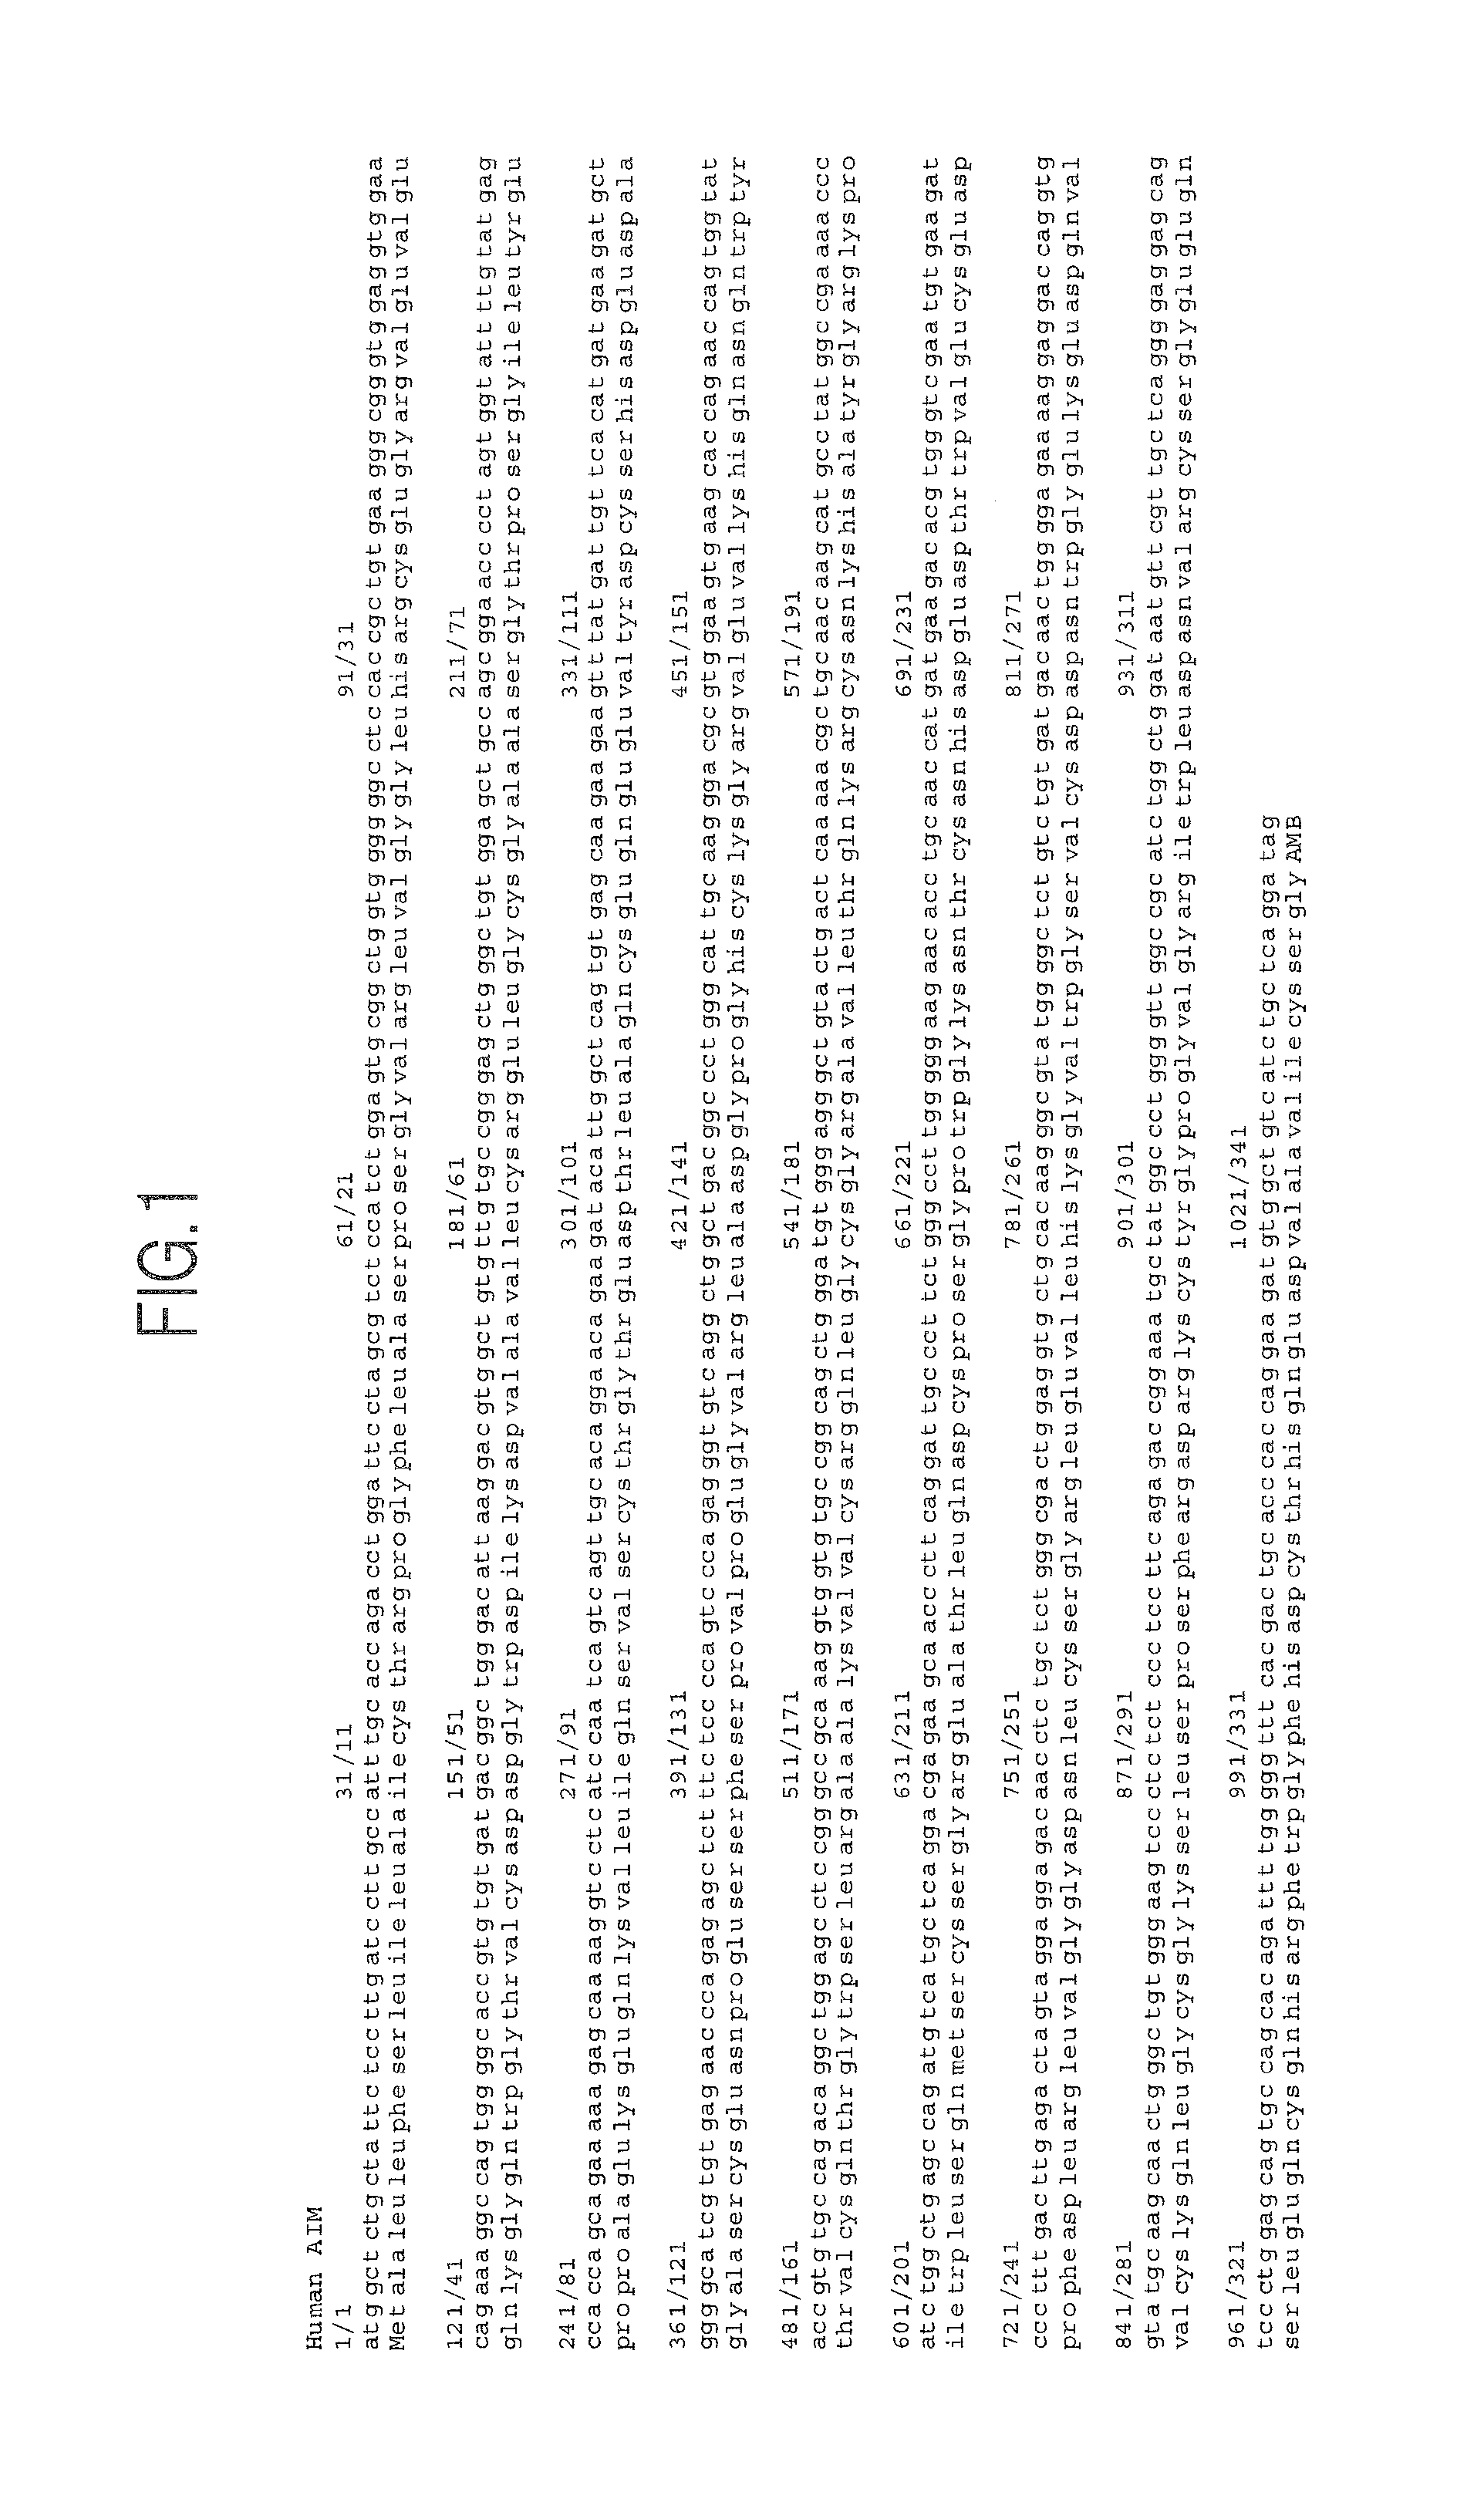 Pharmaceutical composition, food or drink, and methods related thereto